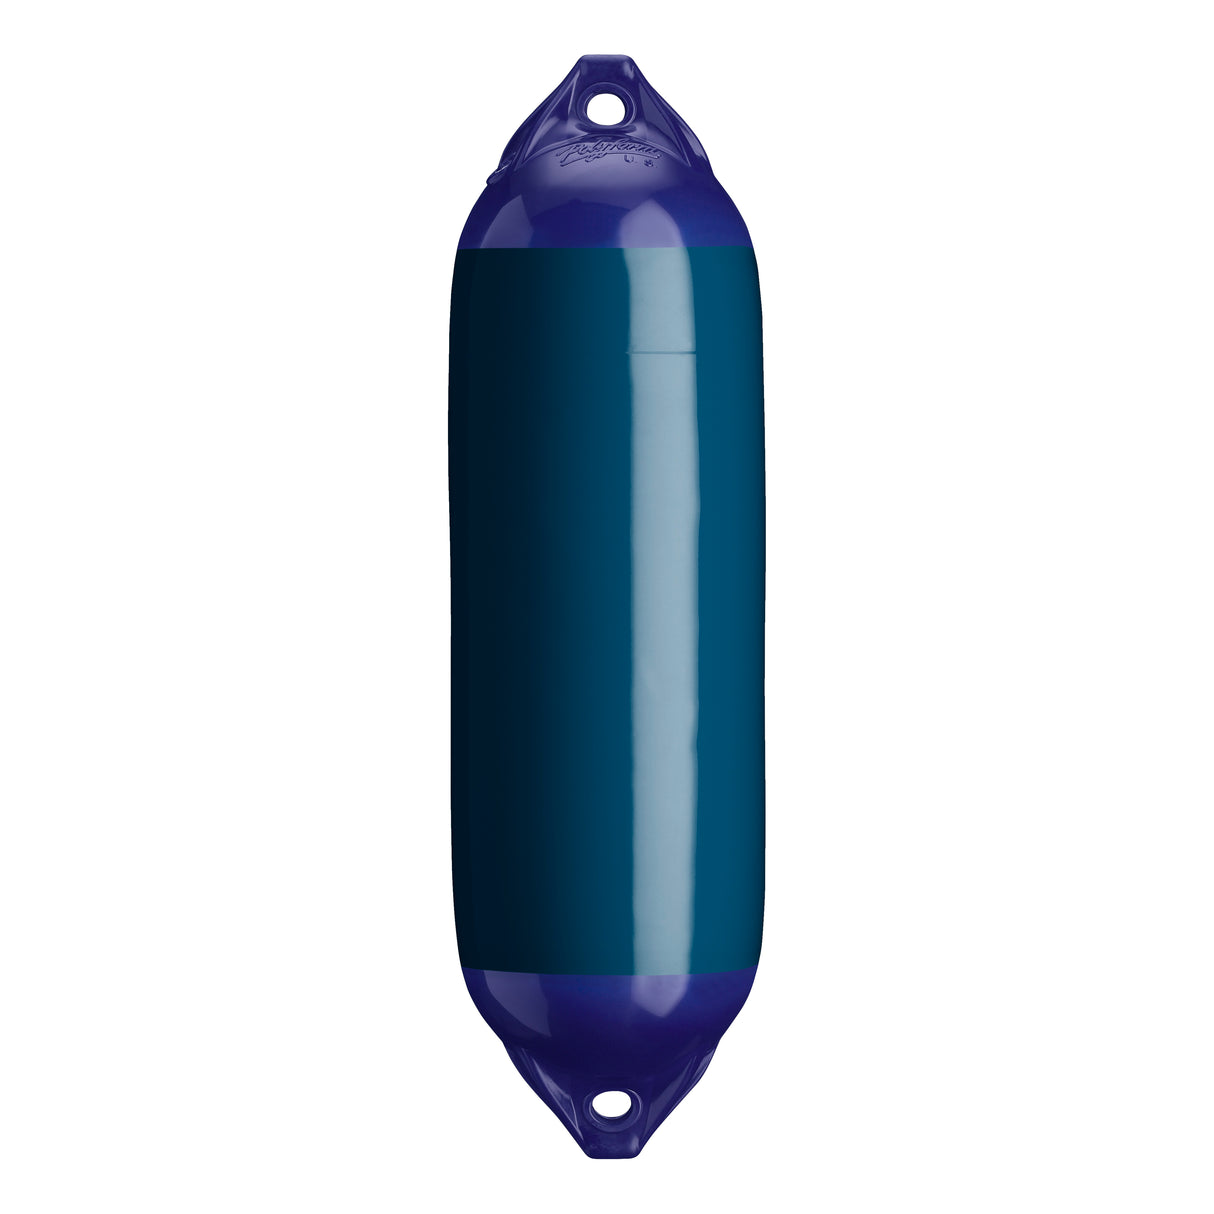 Catalina Blue boat fender with Navy-Top, Polyform F-02 